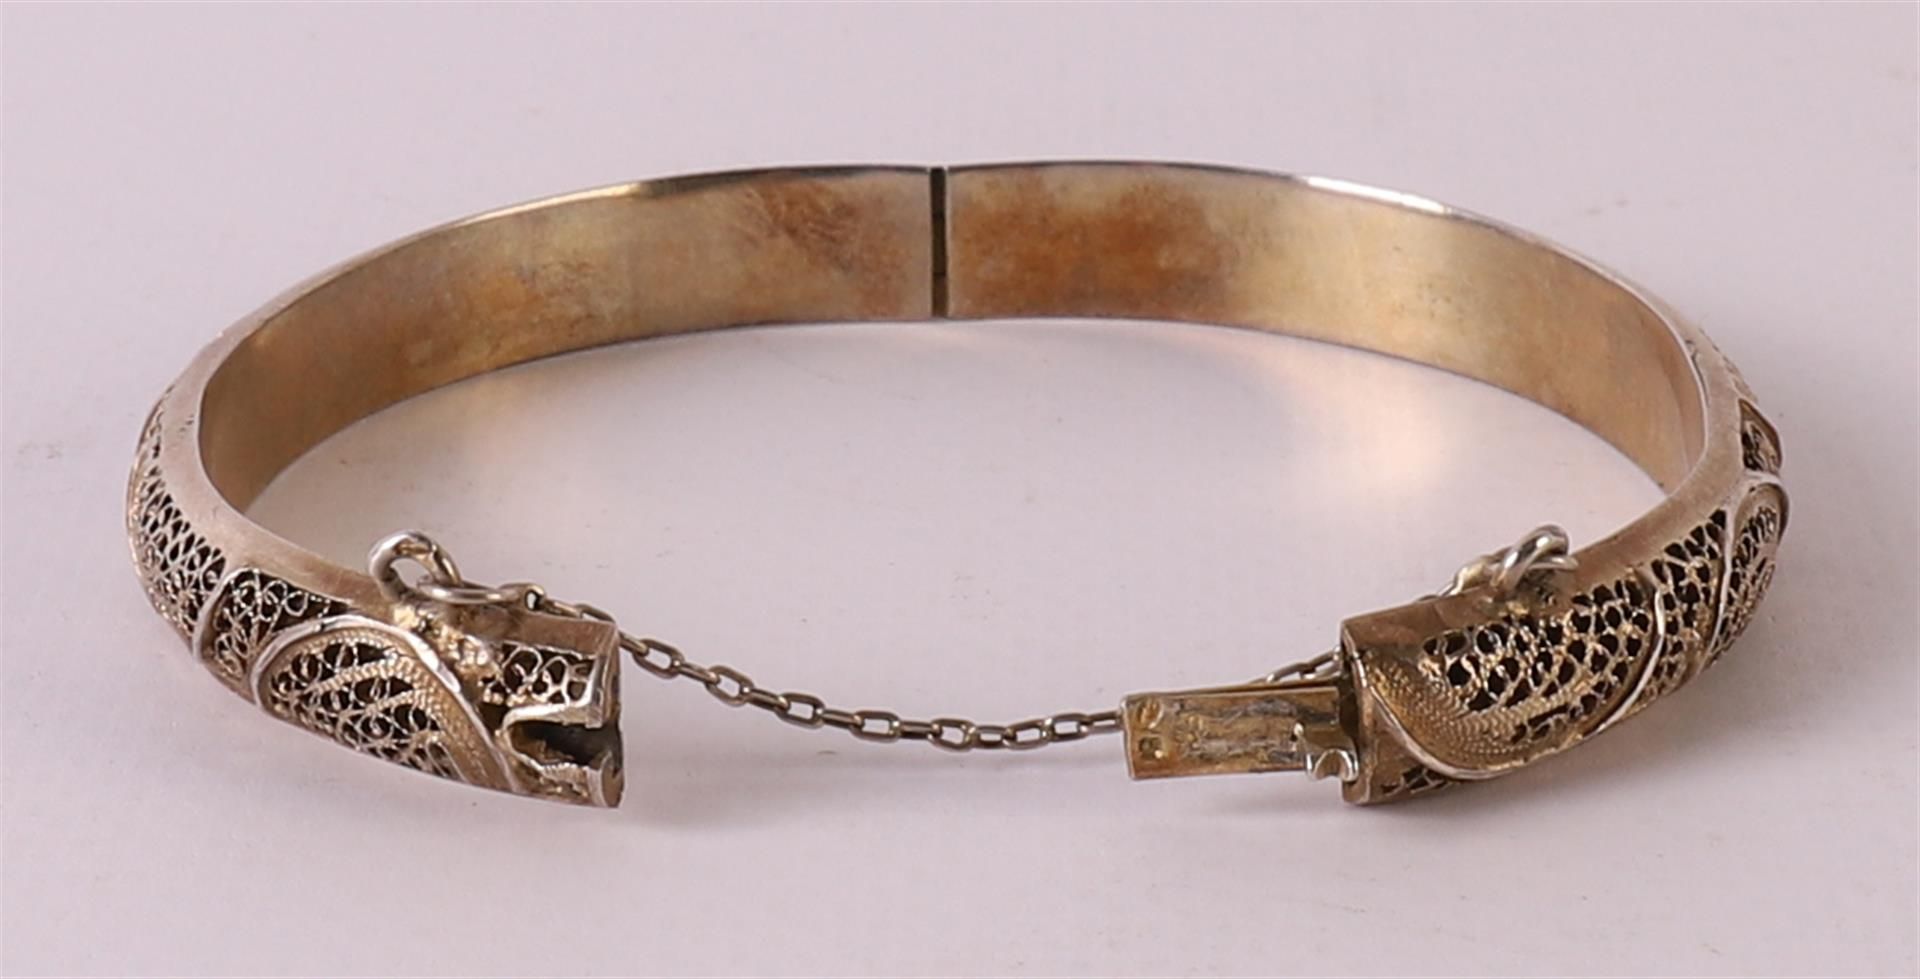 A gold-plated silver stiff bracelet with filigree decor - Image 2 of 2